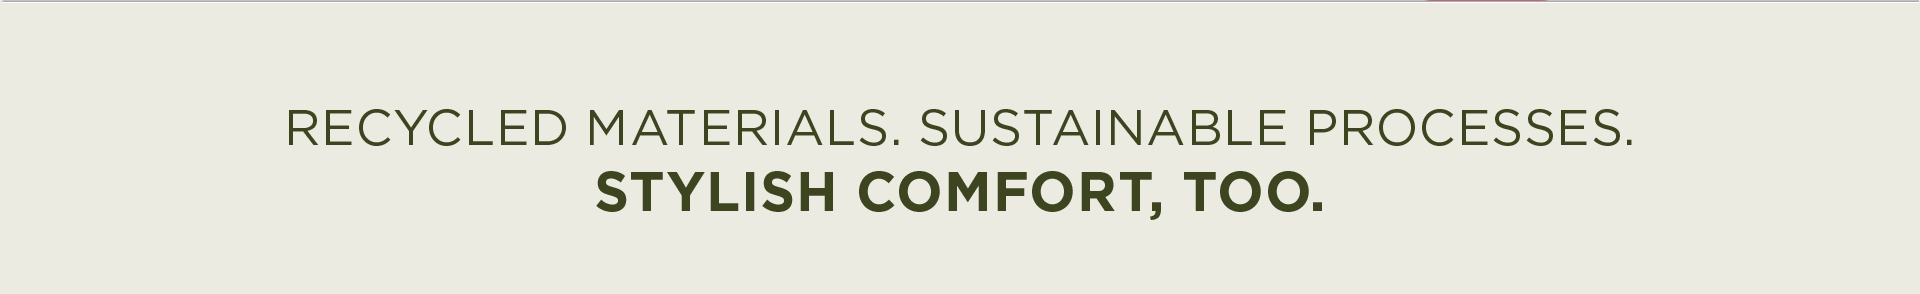 Recycled Materials. Sustainable Processes. Stylish Comfort, too.